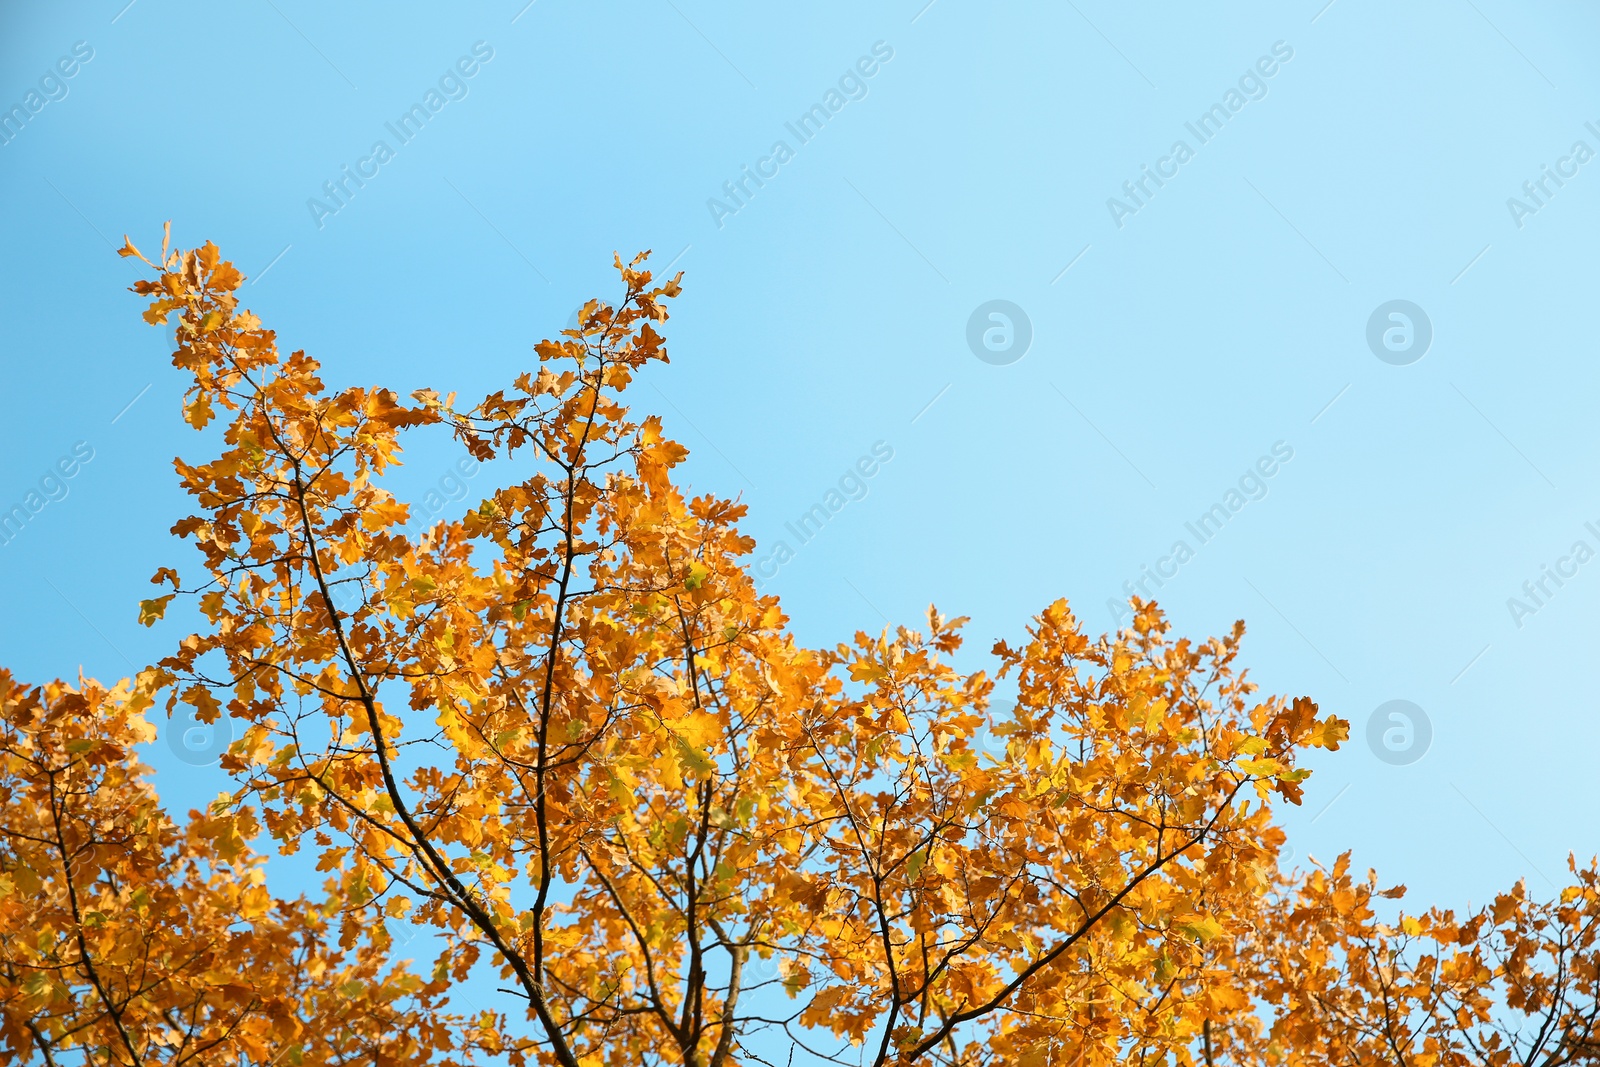 Photo of Tree branches with autumn leaves against sky